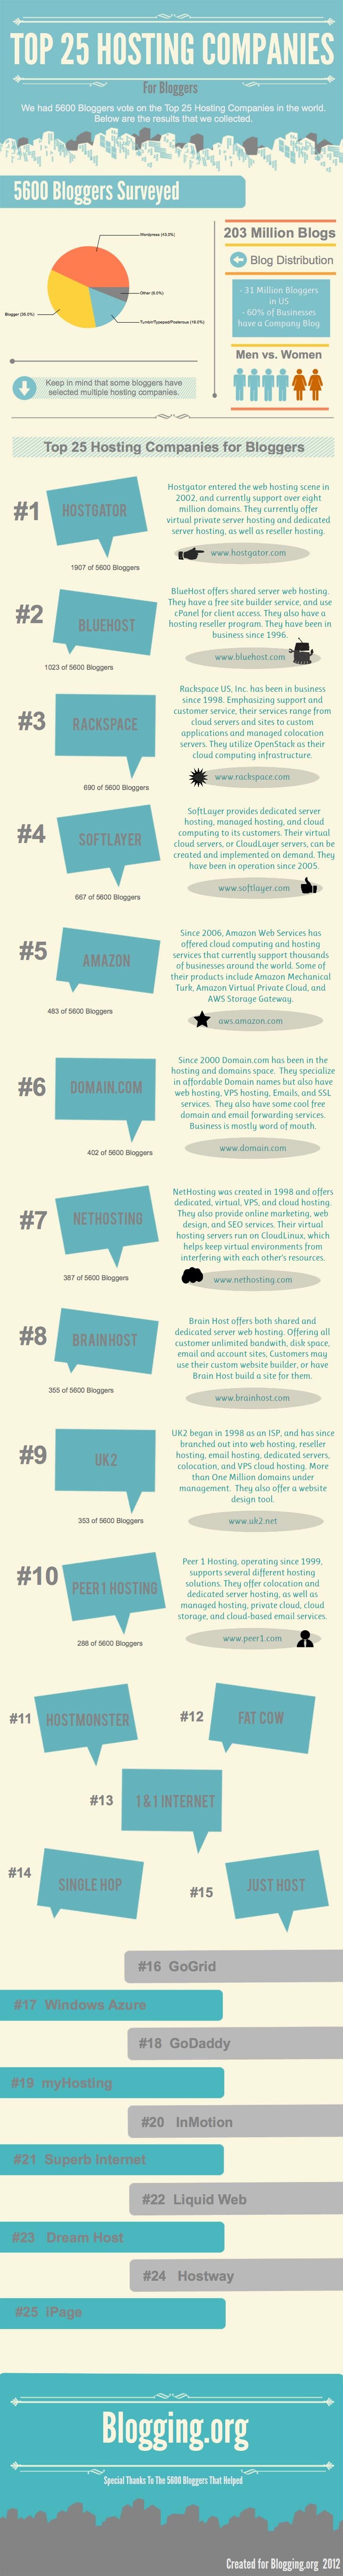 Top 25 Hosting Companies For Bloggers - Infographic